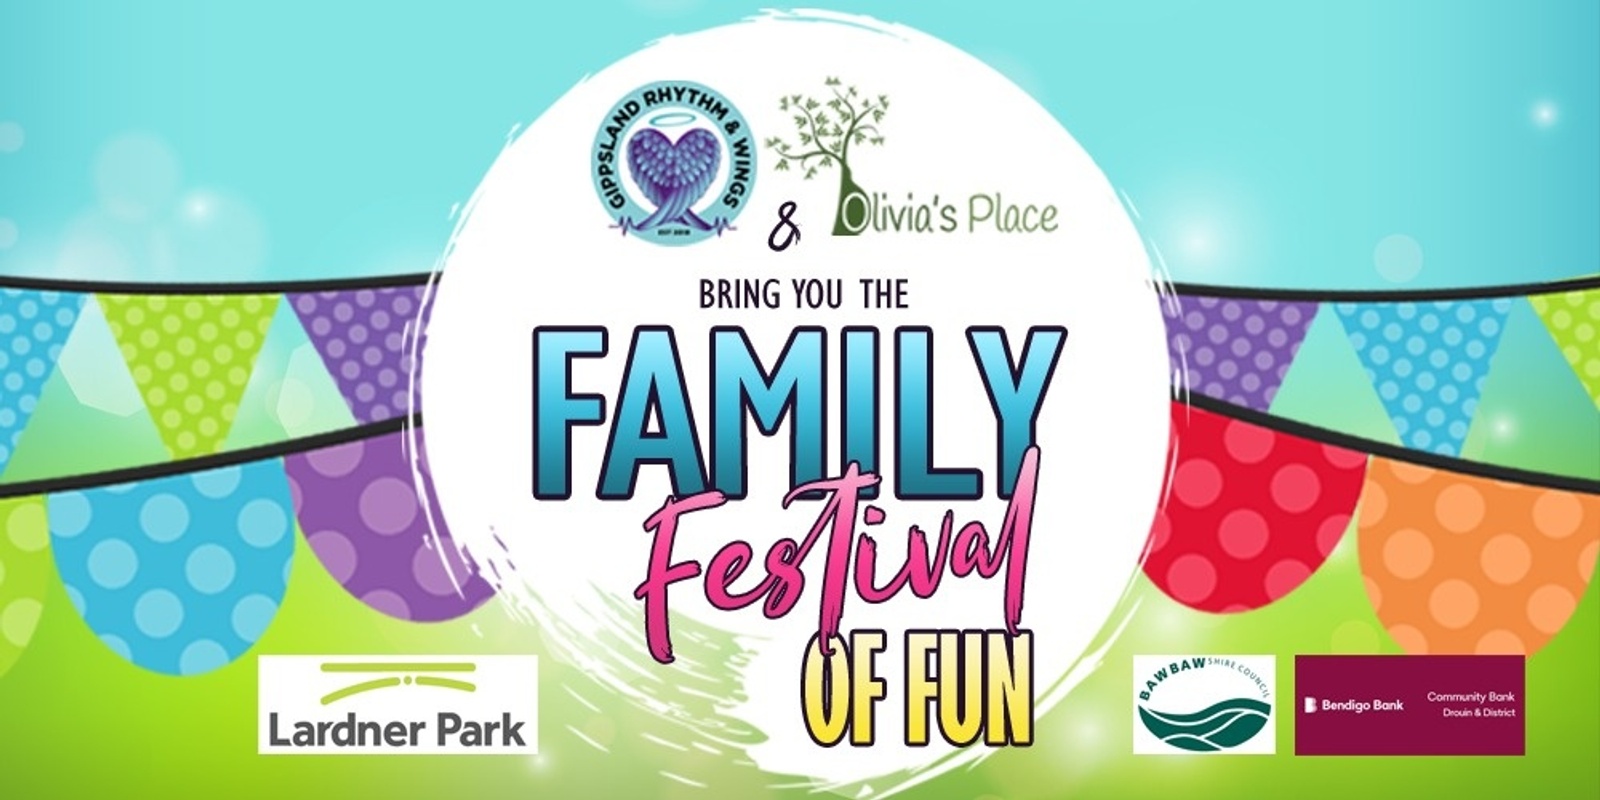 Banner image for Gippsland Rhythm & Wings and Olivia's Place Family Festival of Fun